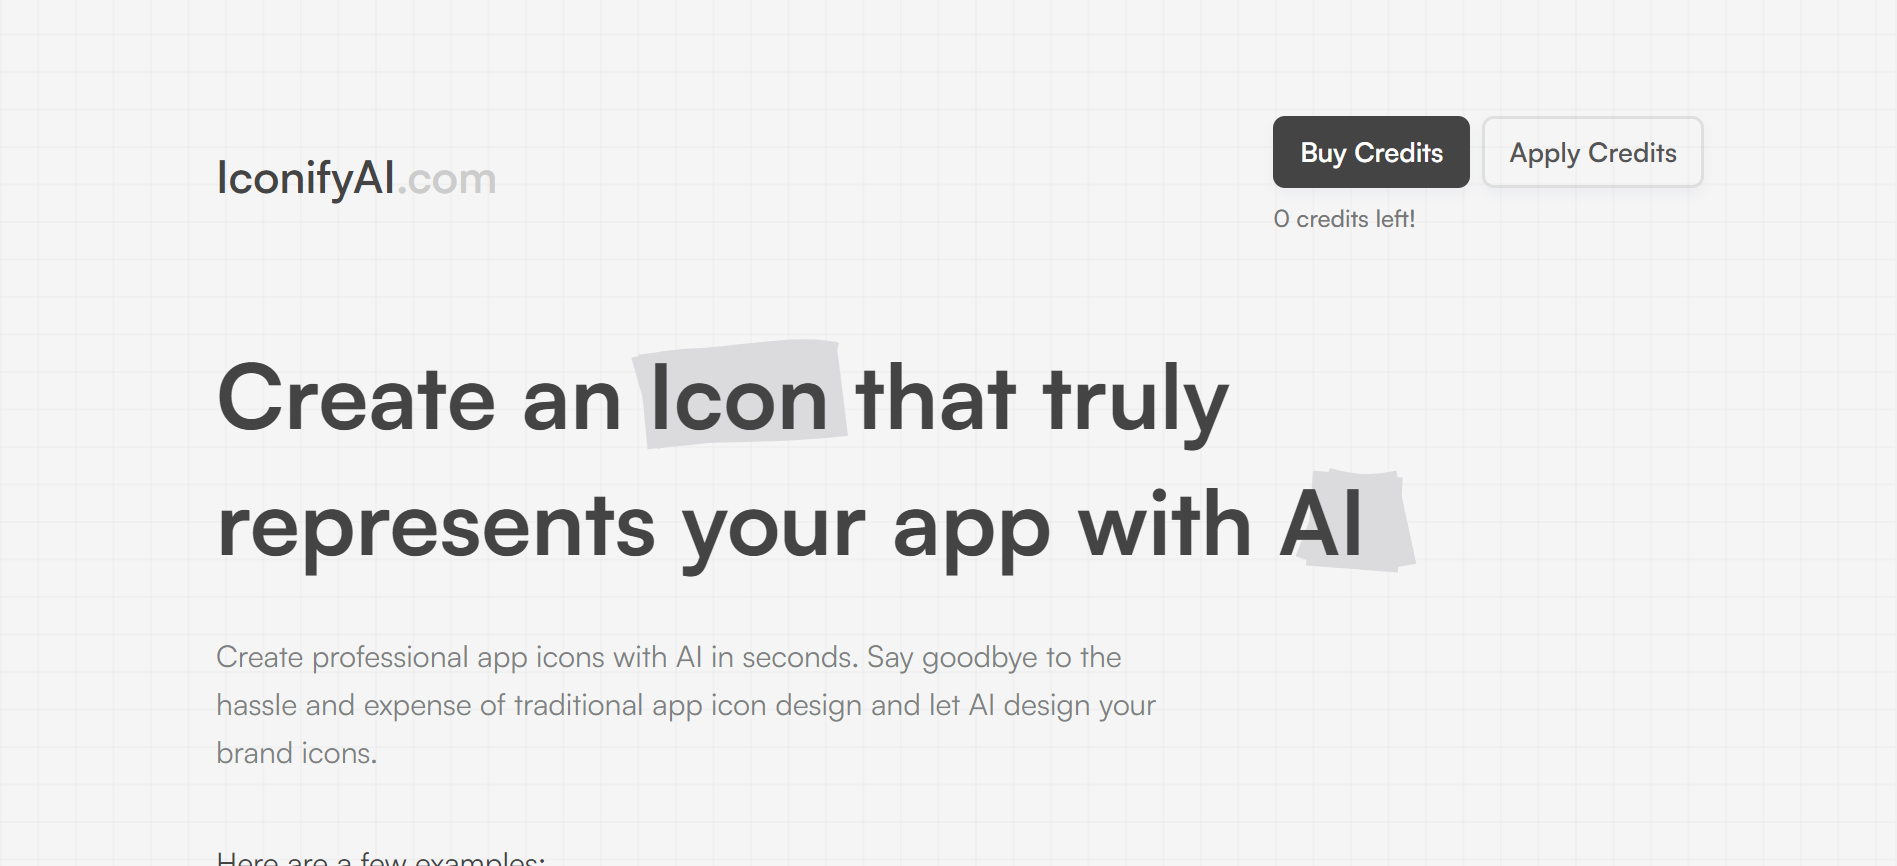 Revamp Your App’s Look with Iconifyai.com: The Ultimate AI-Powered Icon Design Platform!